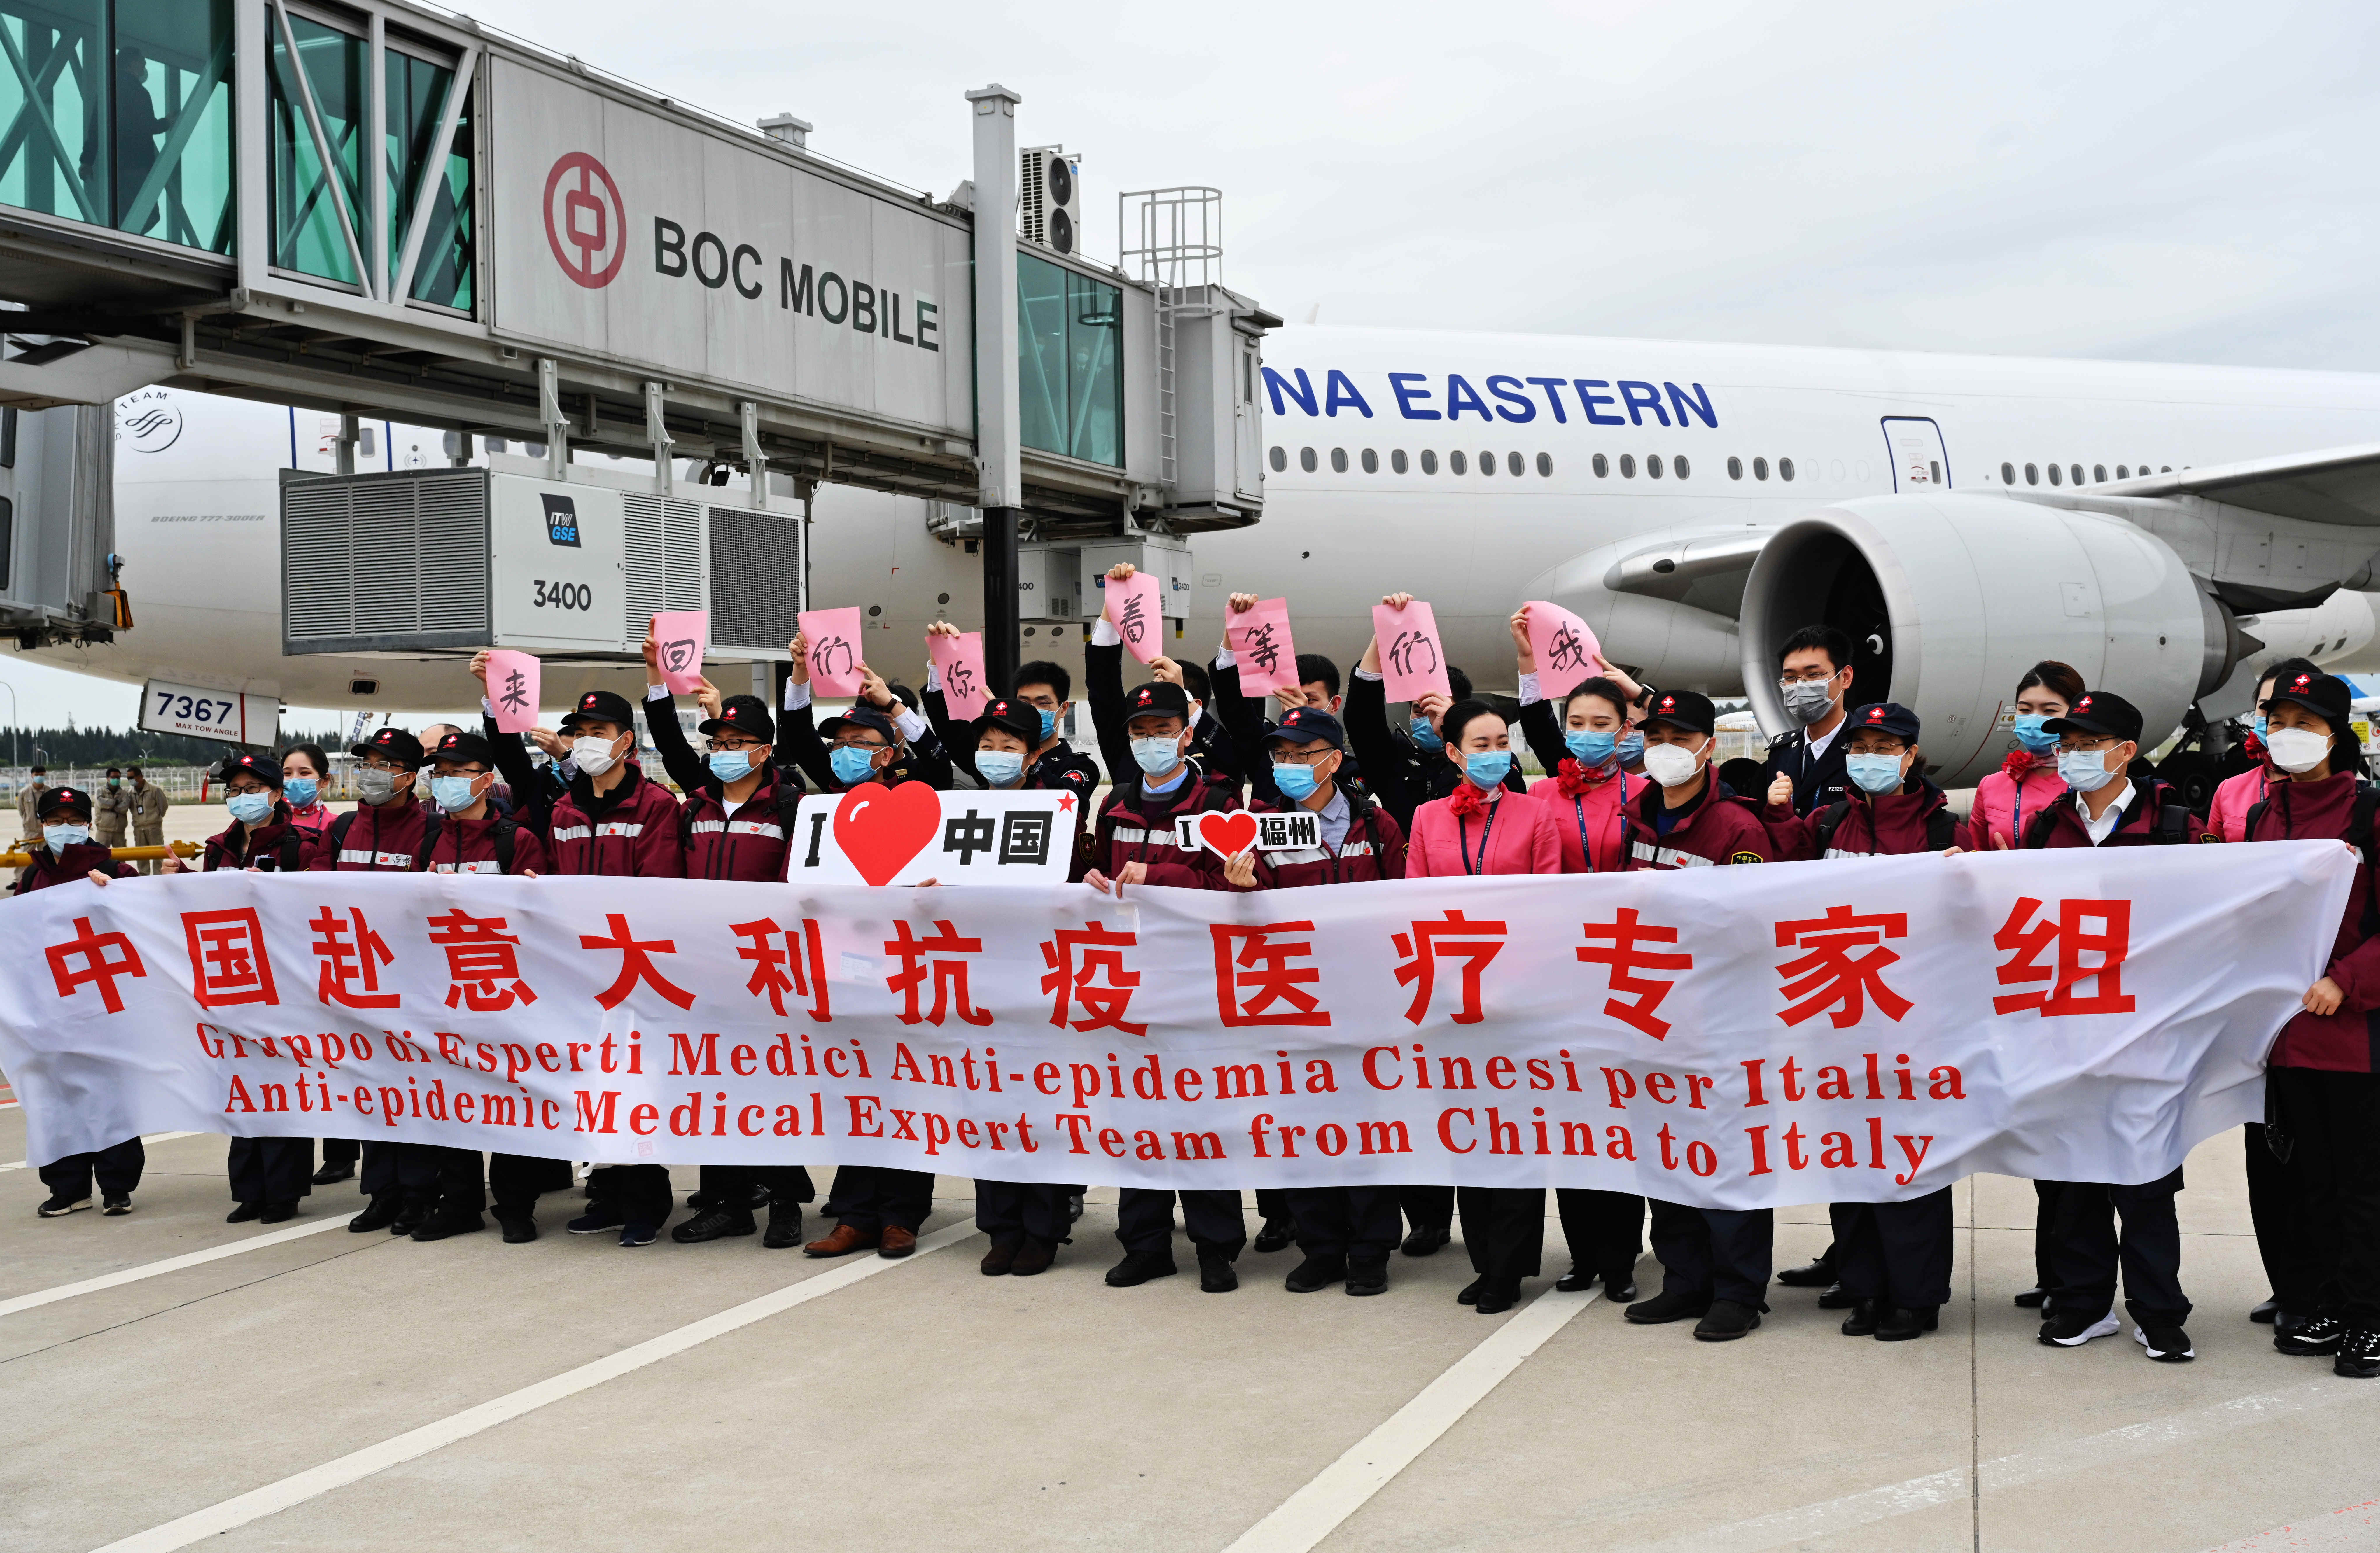 Chinese medical experts pose for a group photo at an airport in Fuzhou, capital of eastern China's Fujian Province, before they leave for Italy. (Xinhua/Wei Peiquan)